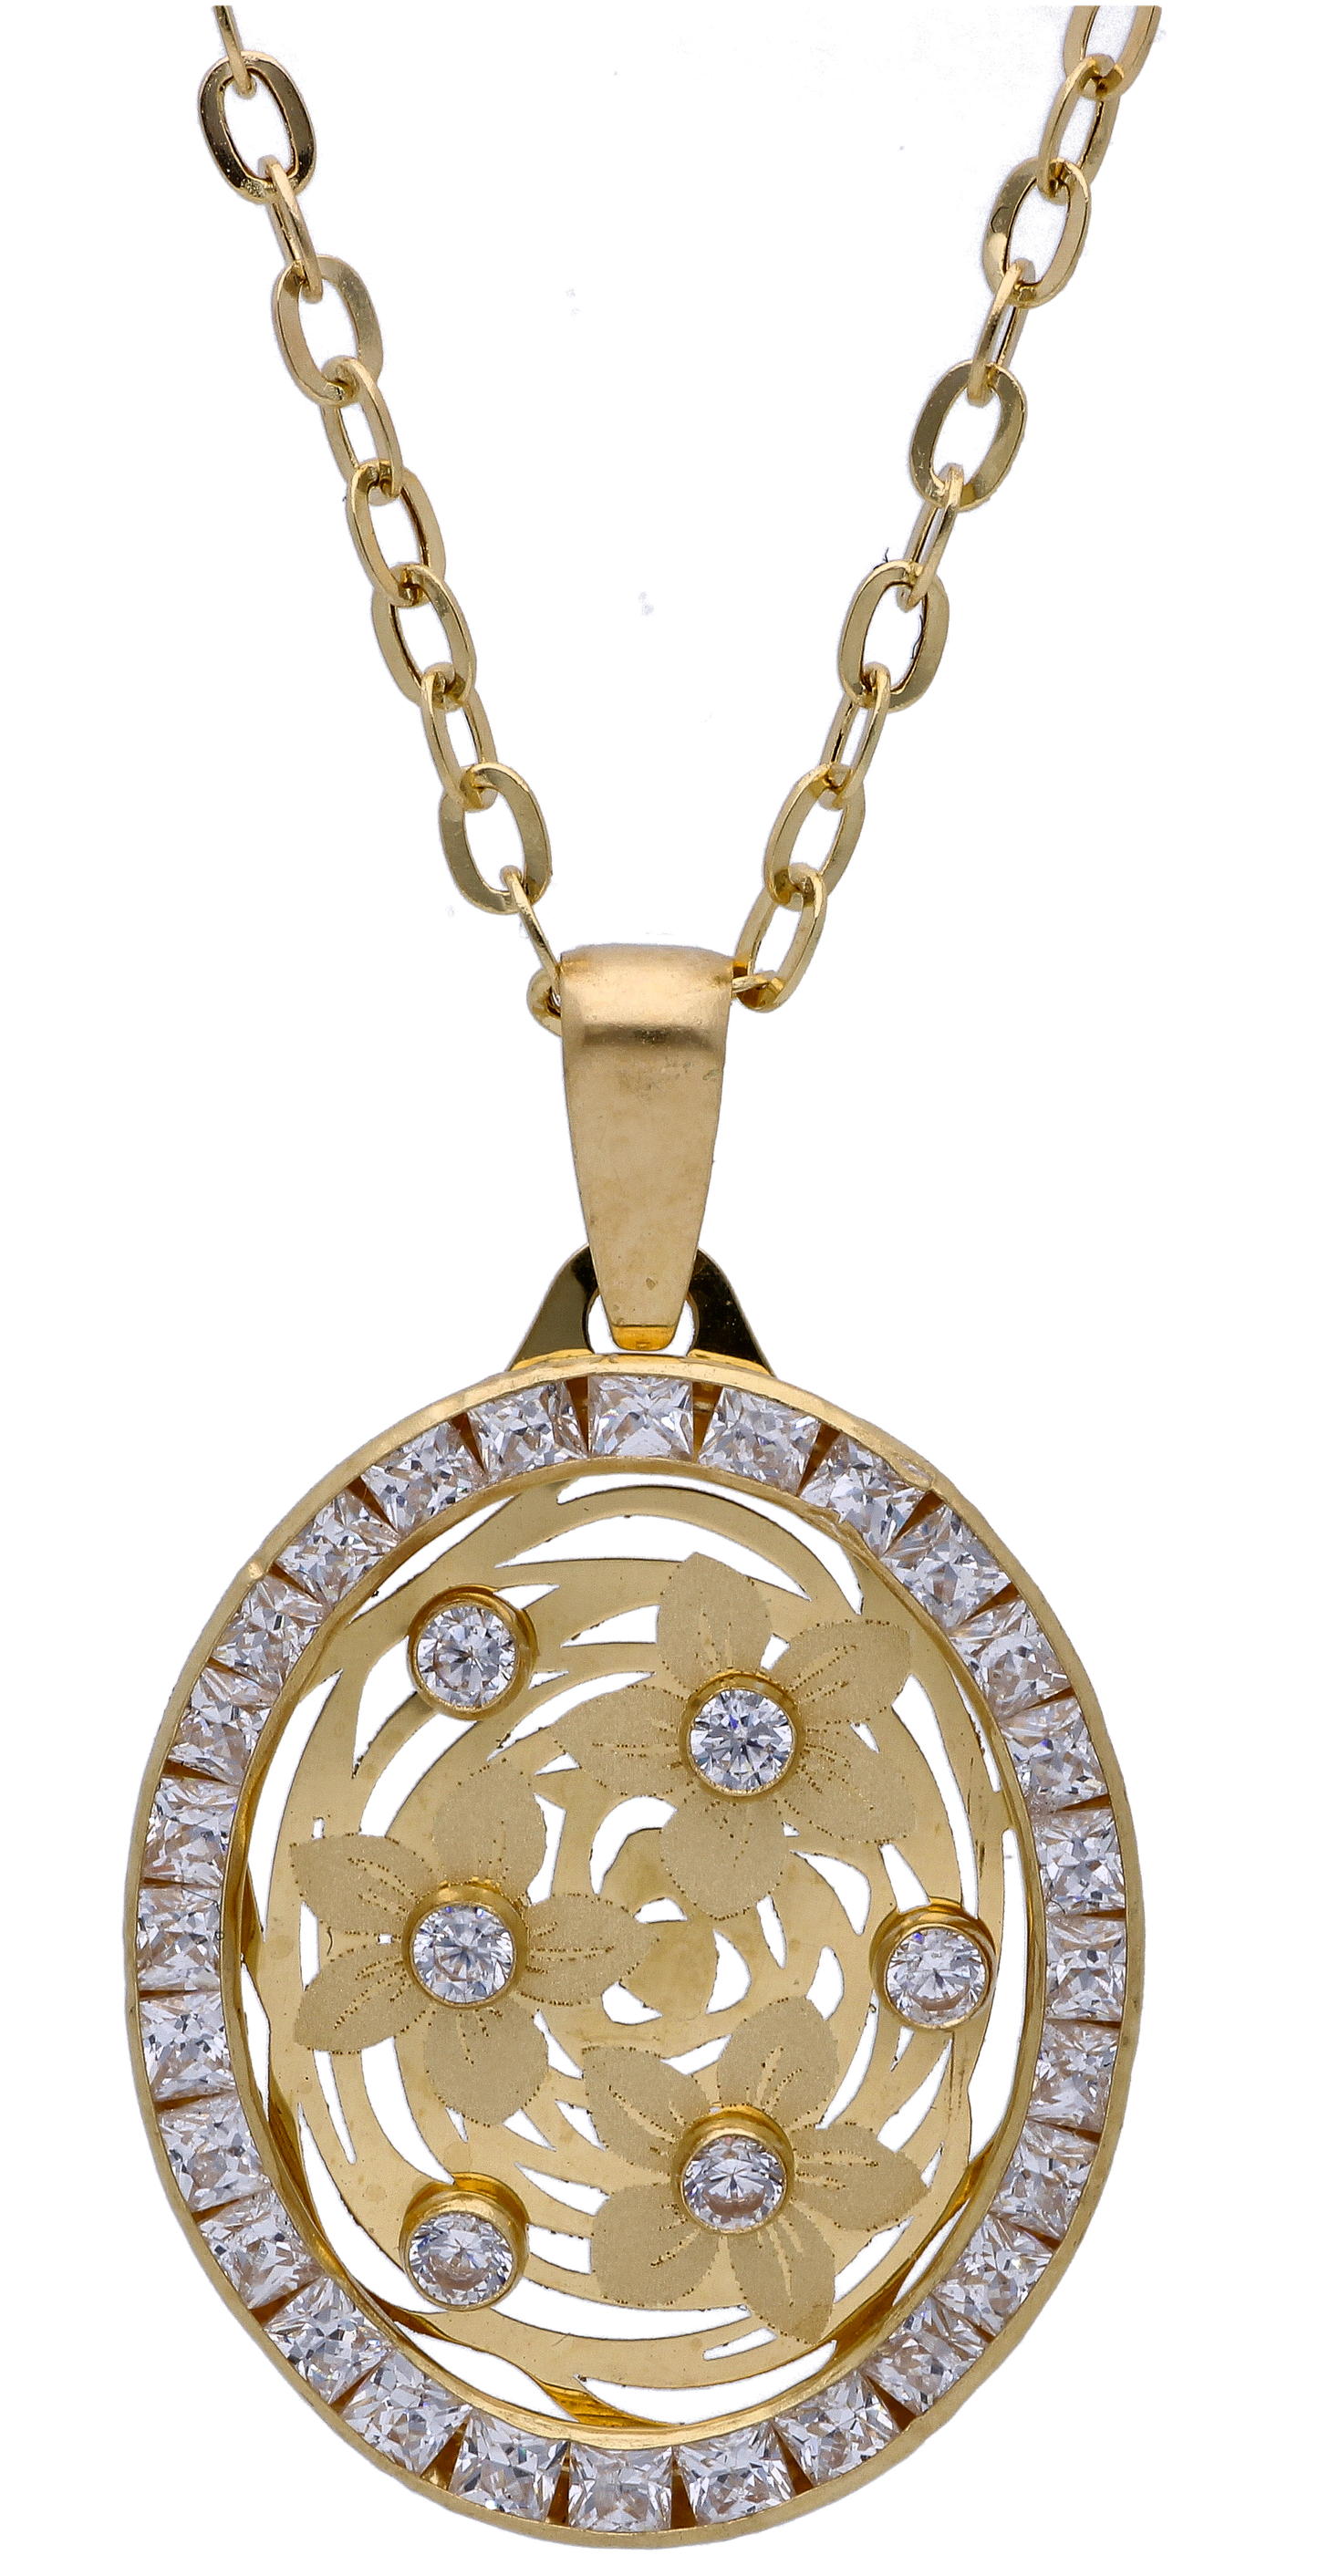 Gold Necklace (Chain with Zircon Gold Pendant) 18KT - FKJNKL18KU6298